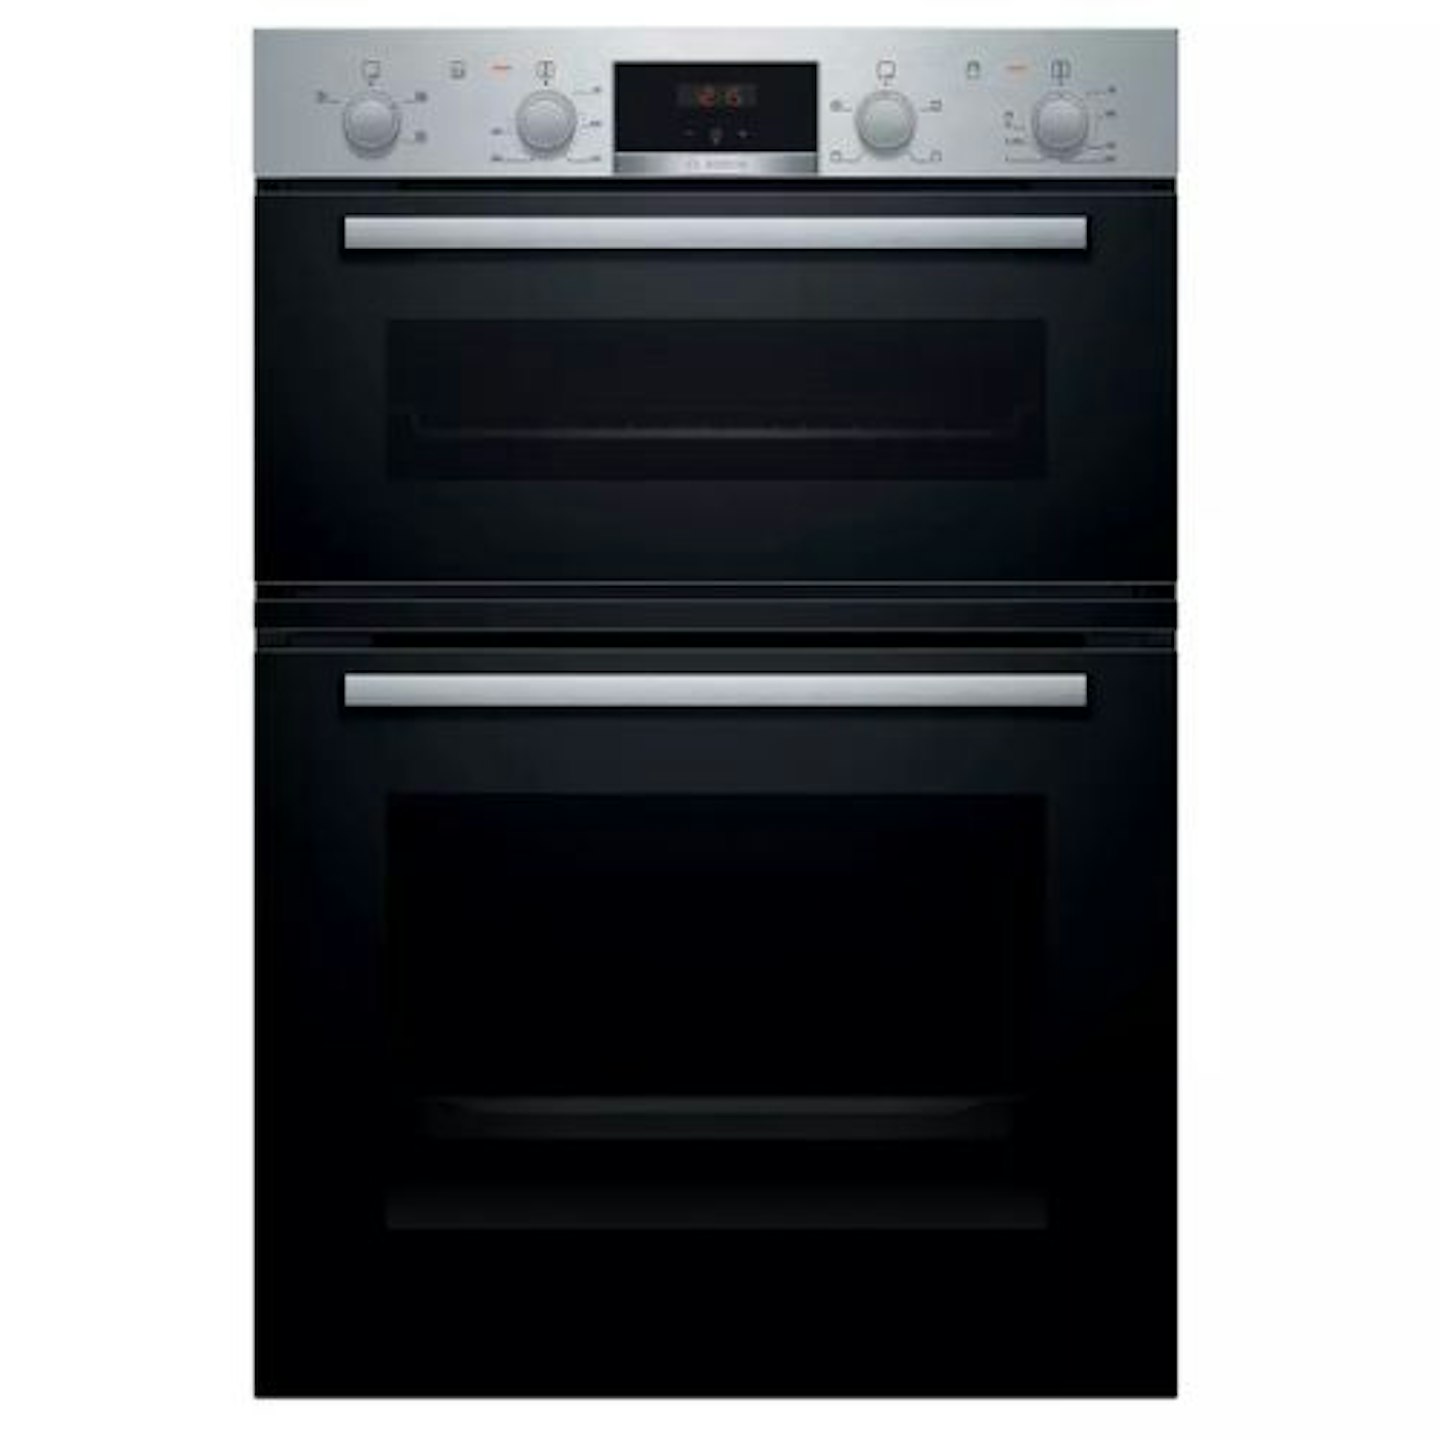 Bosch MHA133BROB Built In Double Electric Oven - S Steel859/0952